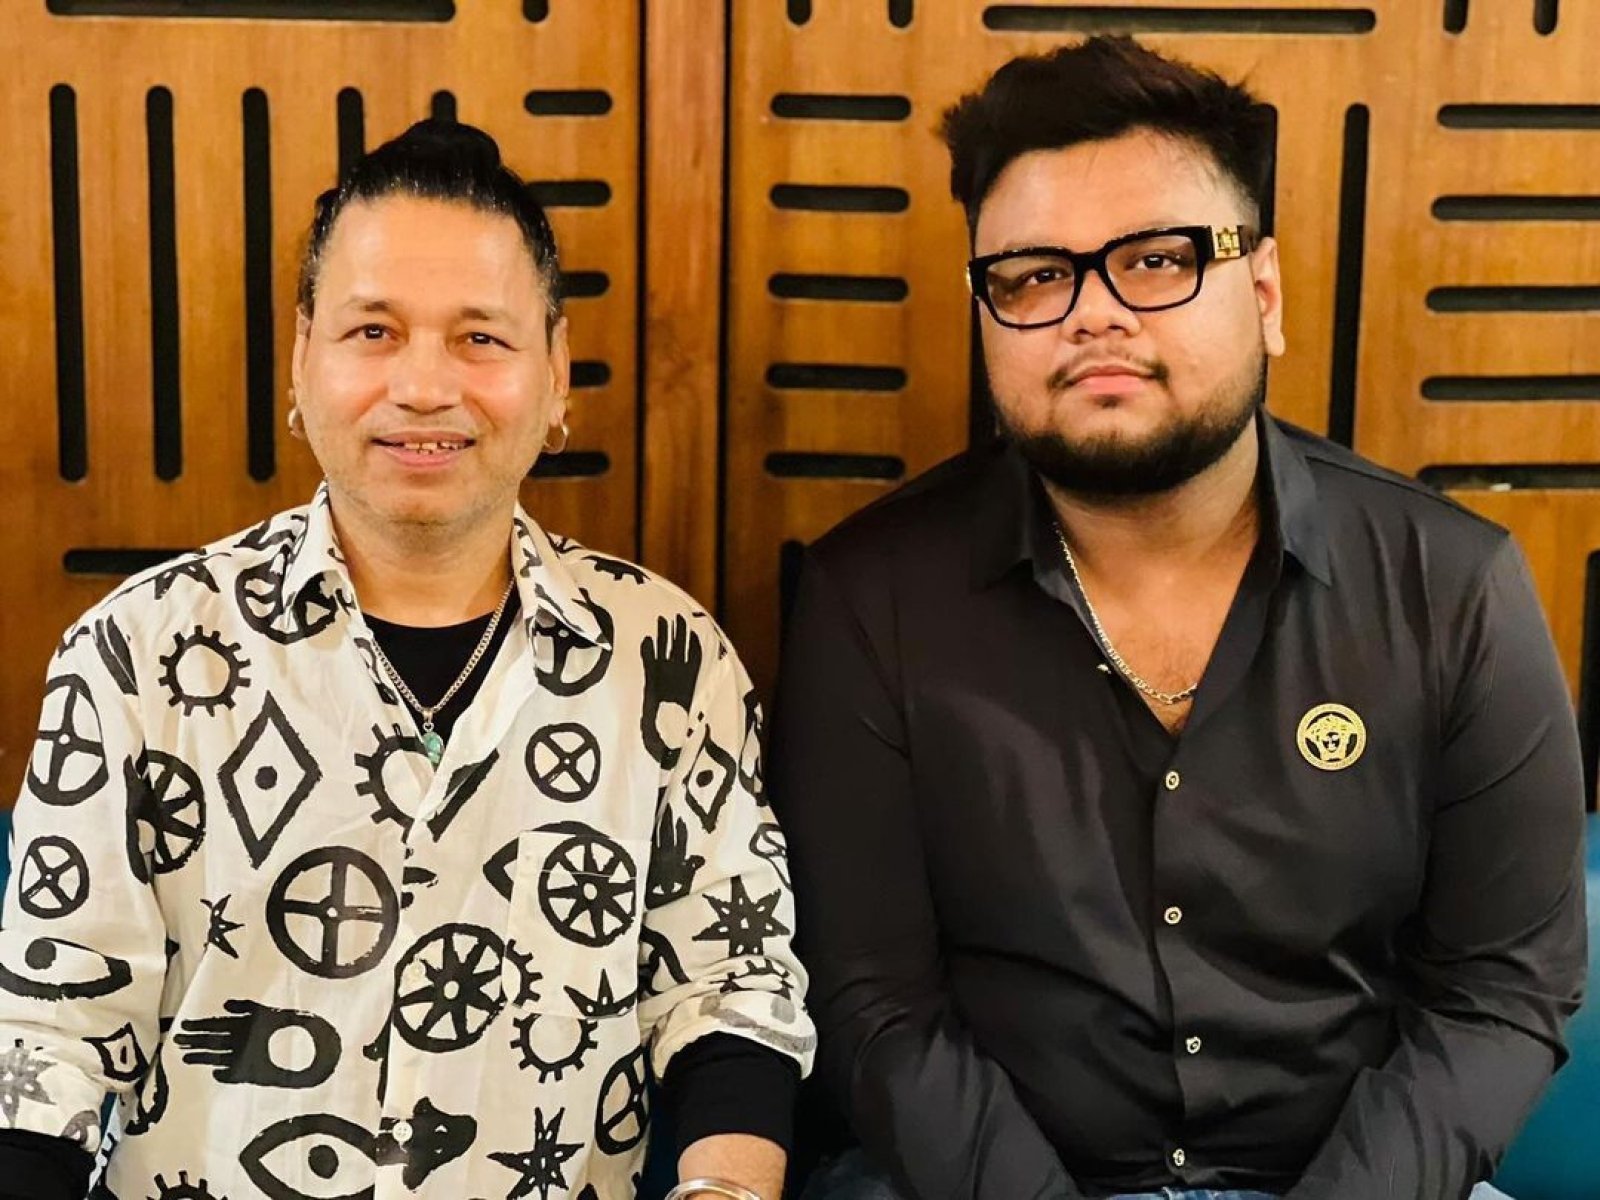 'Anurag is really sweet and a lovable composer...' says singer Kailash Kher on working with Anurag Halder